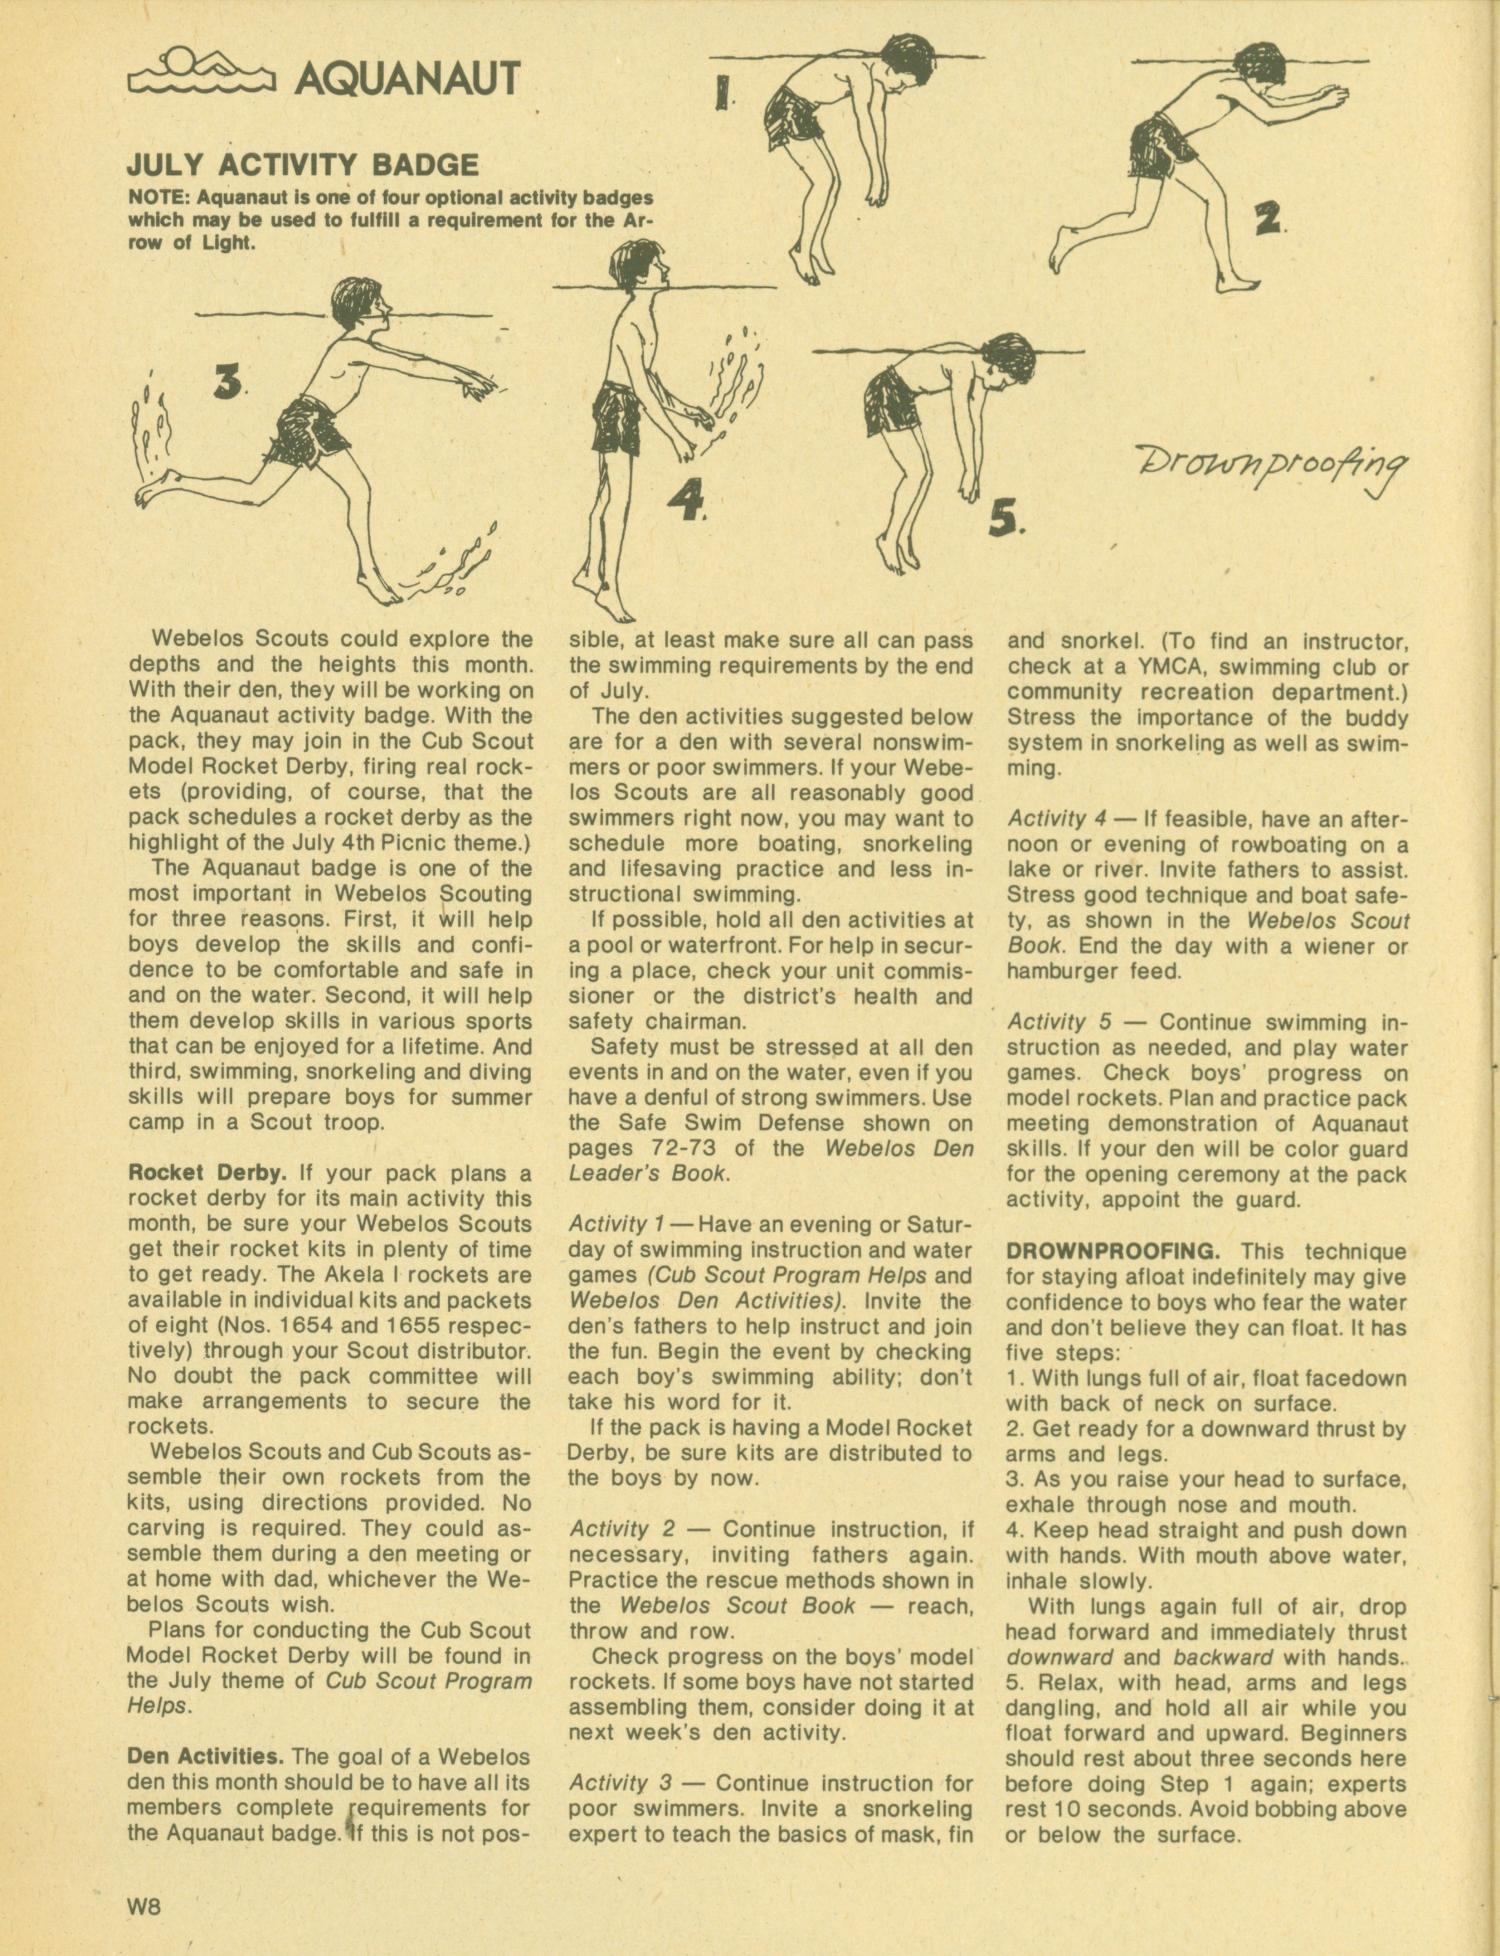 Scouting, Volume 64, Number 2, March-April 1976
                                                
                                                    W8
                                                